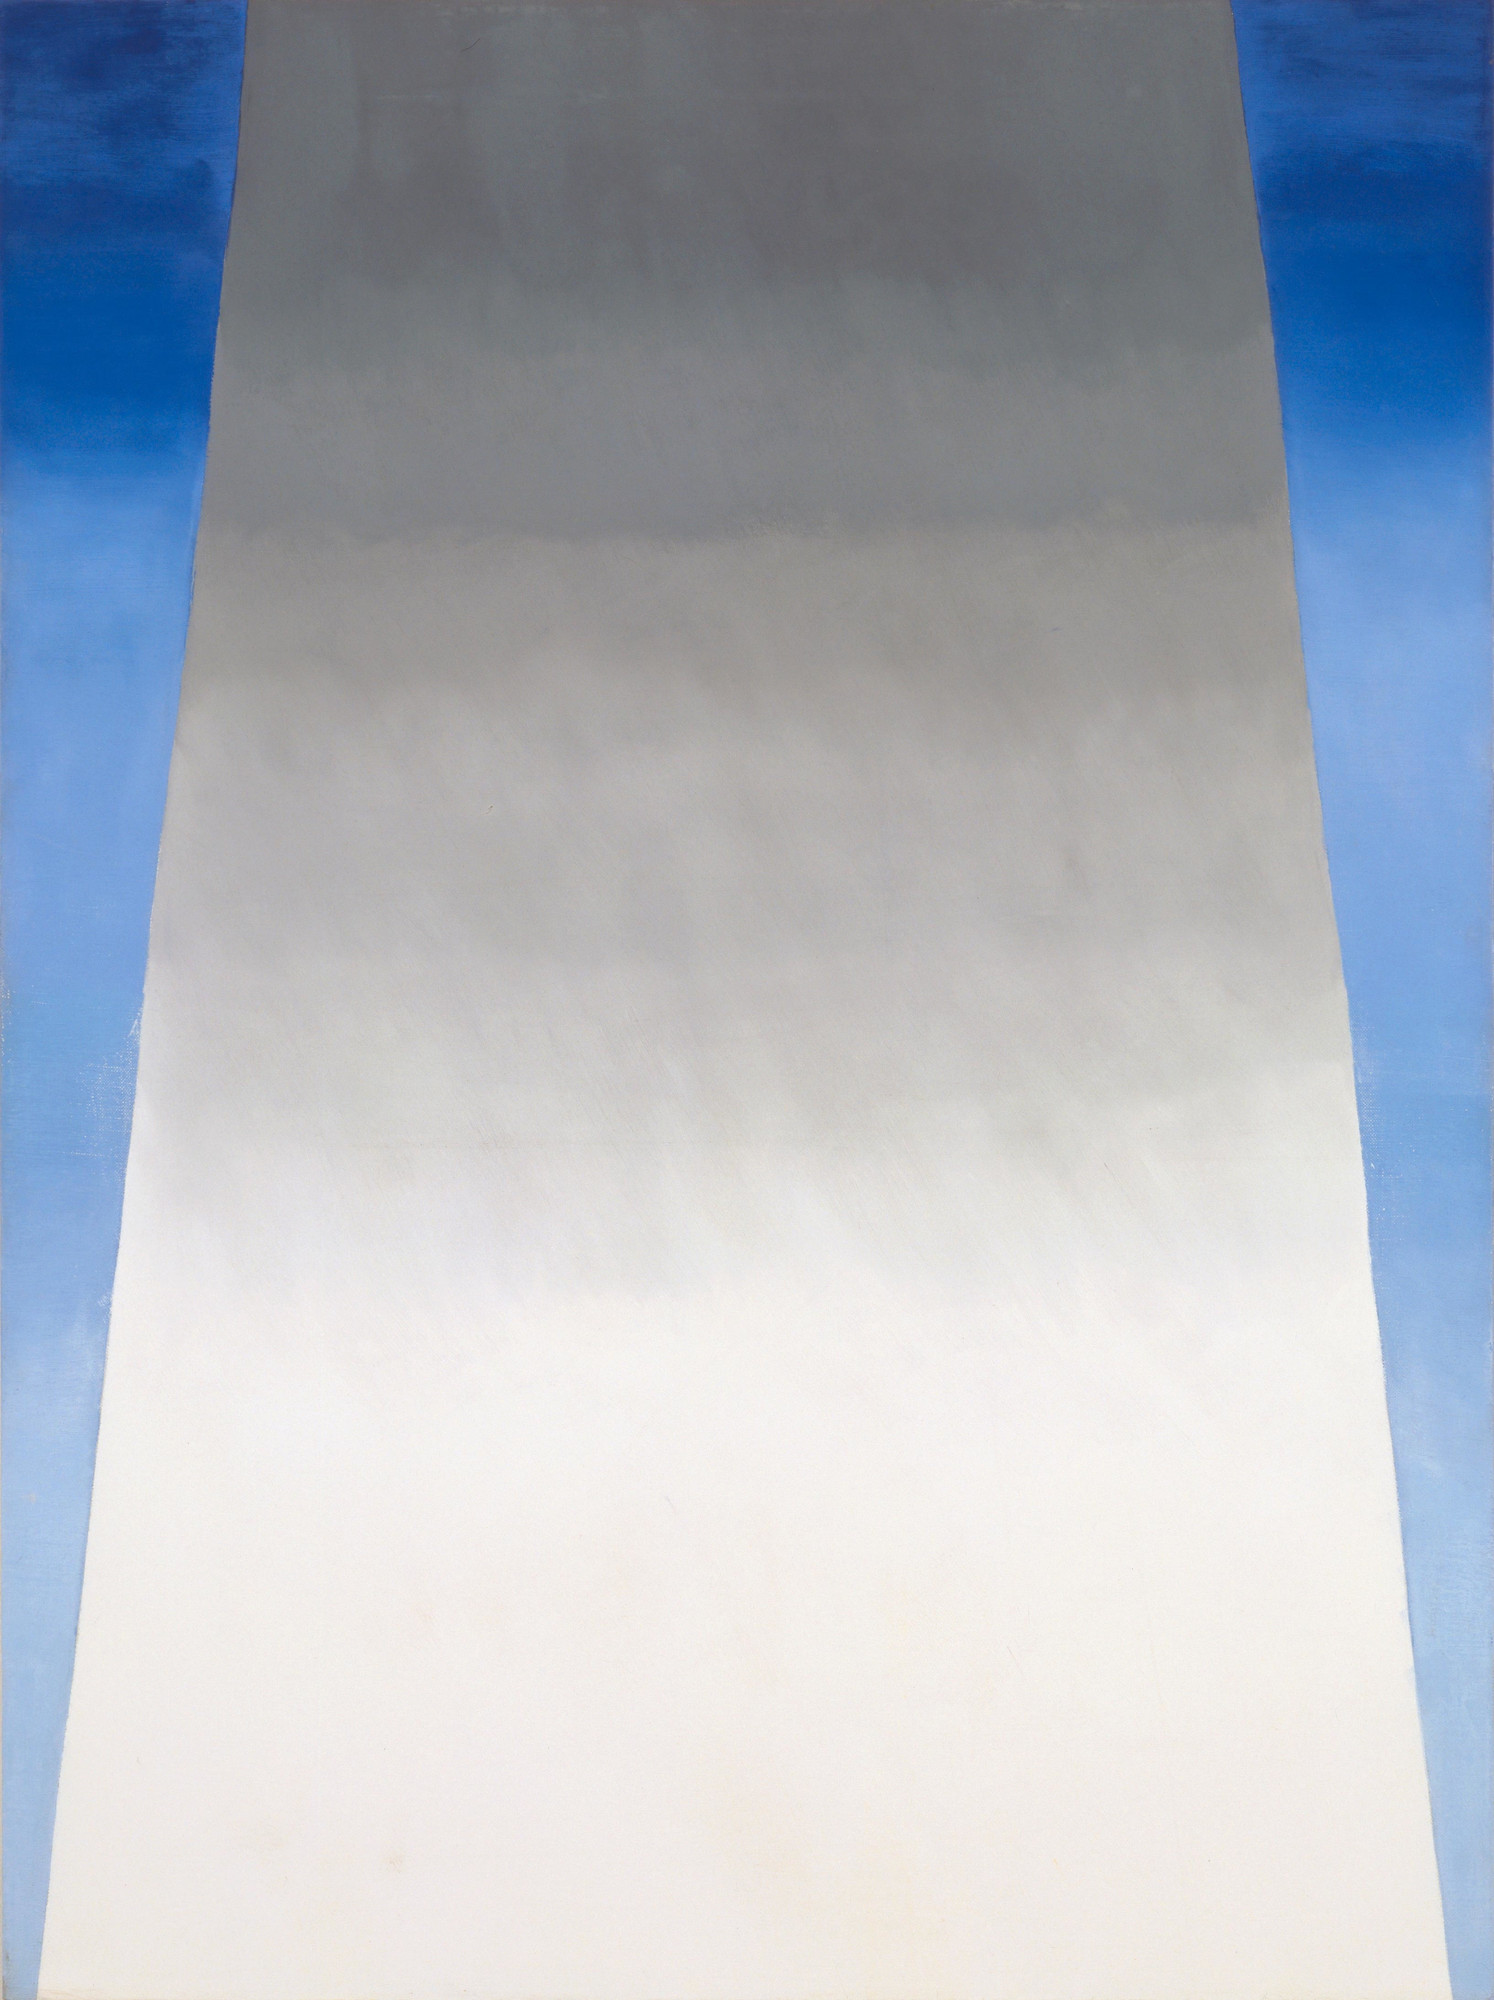 Georgia Oâ€™Keeffe. <em>From a Day with Juan II.</em> 1977. The Museum of Modern Art, New York. Georgia Oâ€™Keeffe Bequest. Â© 2018 The Museum of Modern Art / Artists Rights Society (ARS), New York
